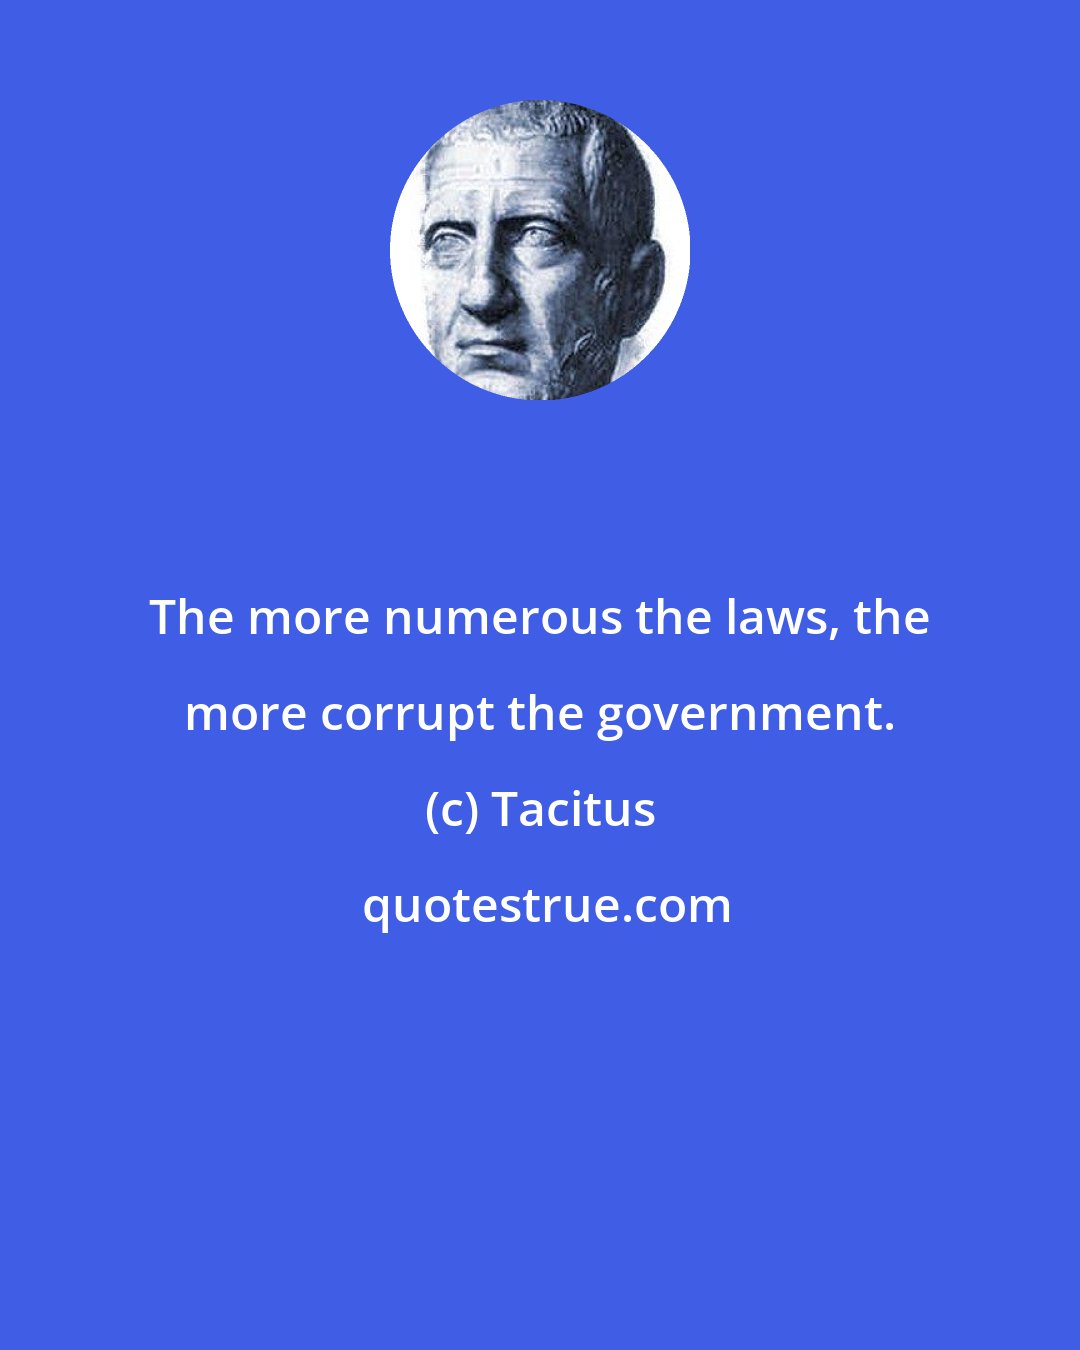 Tacitus: The more numerous the laws, the more corrupt the government.